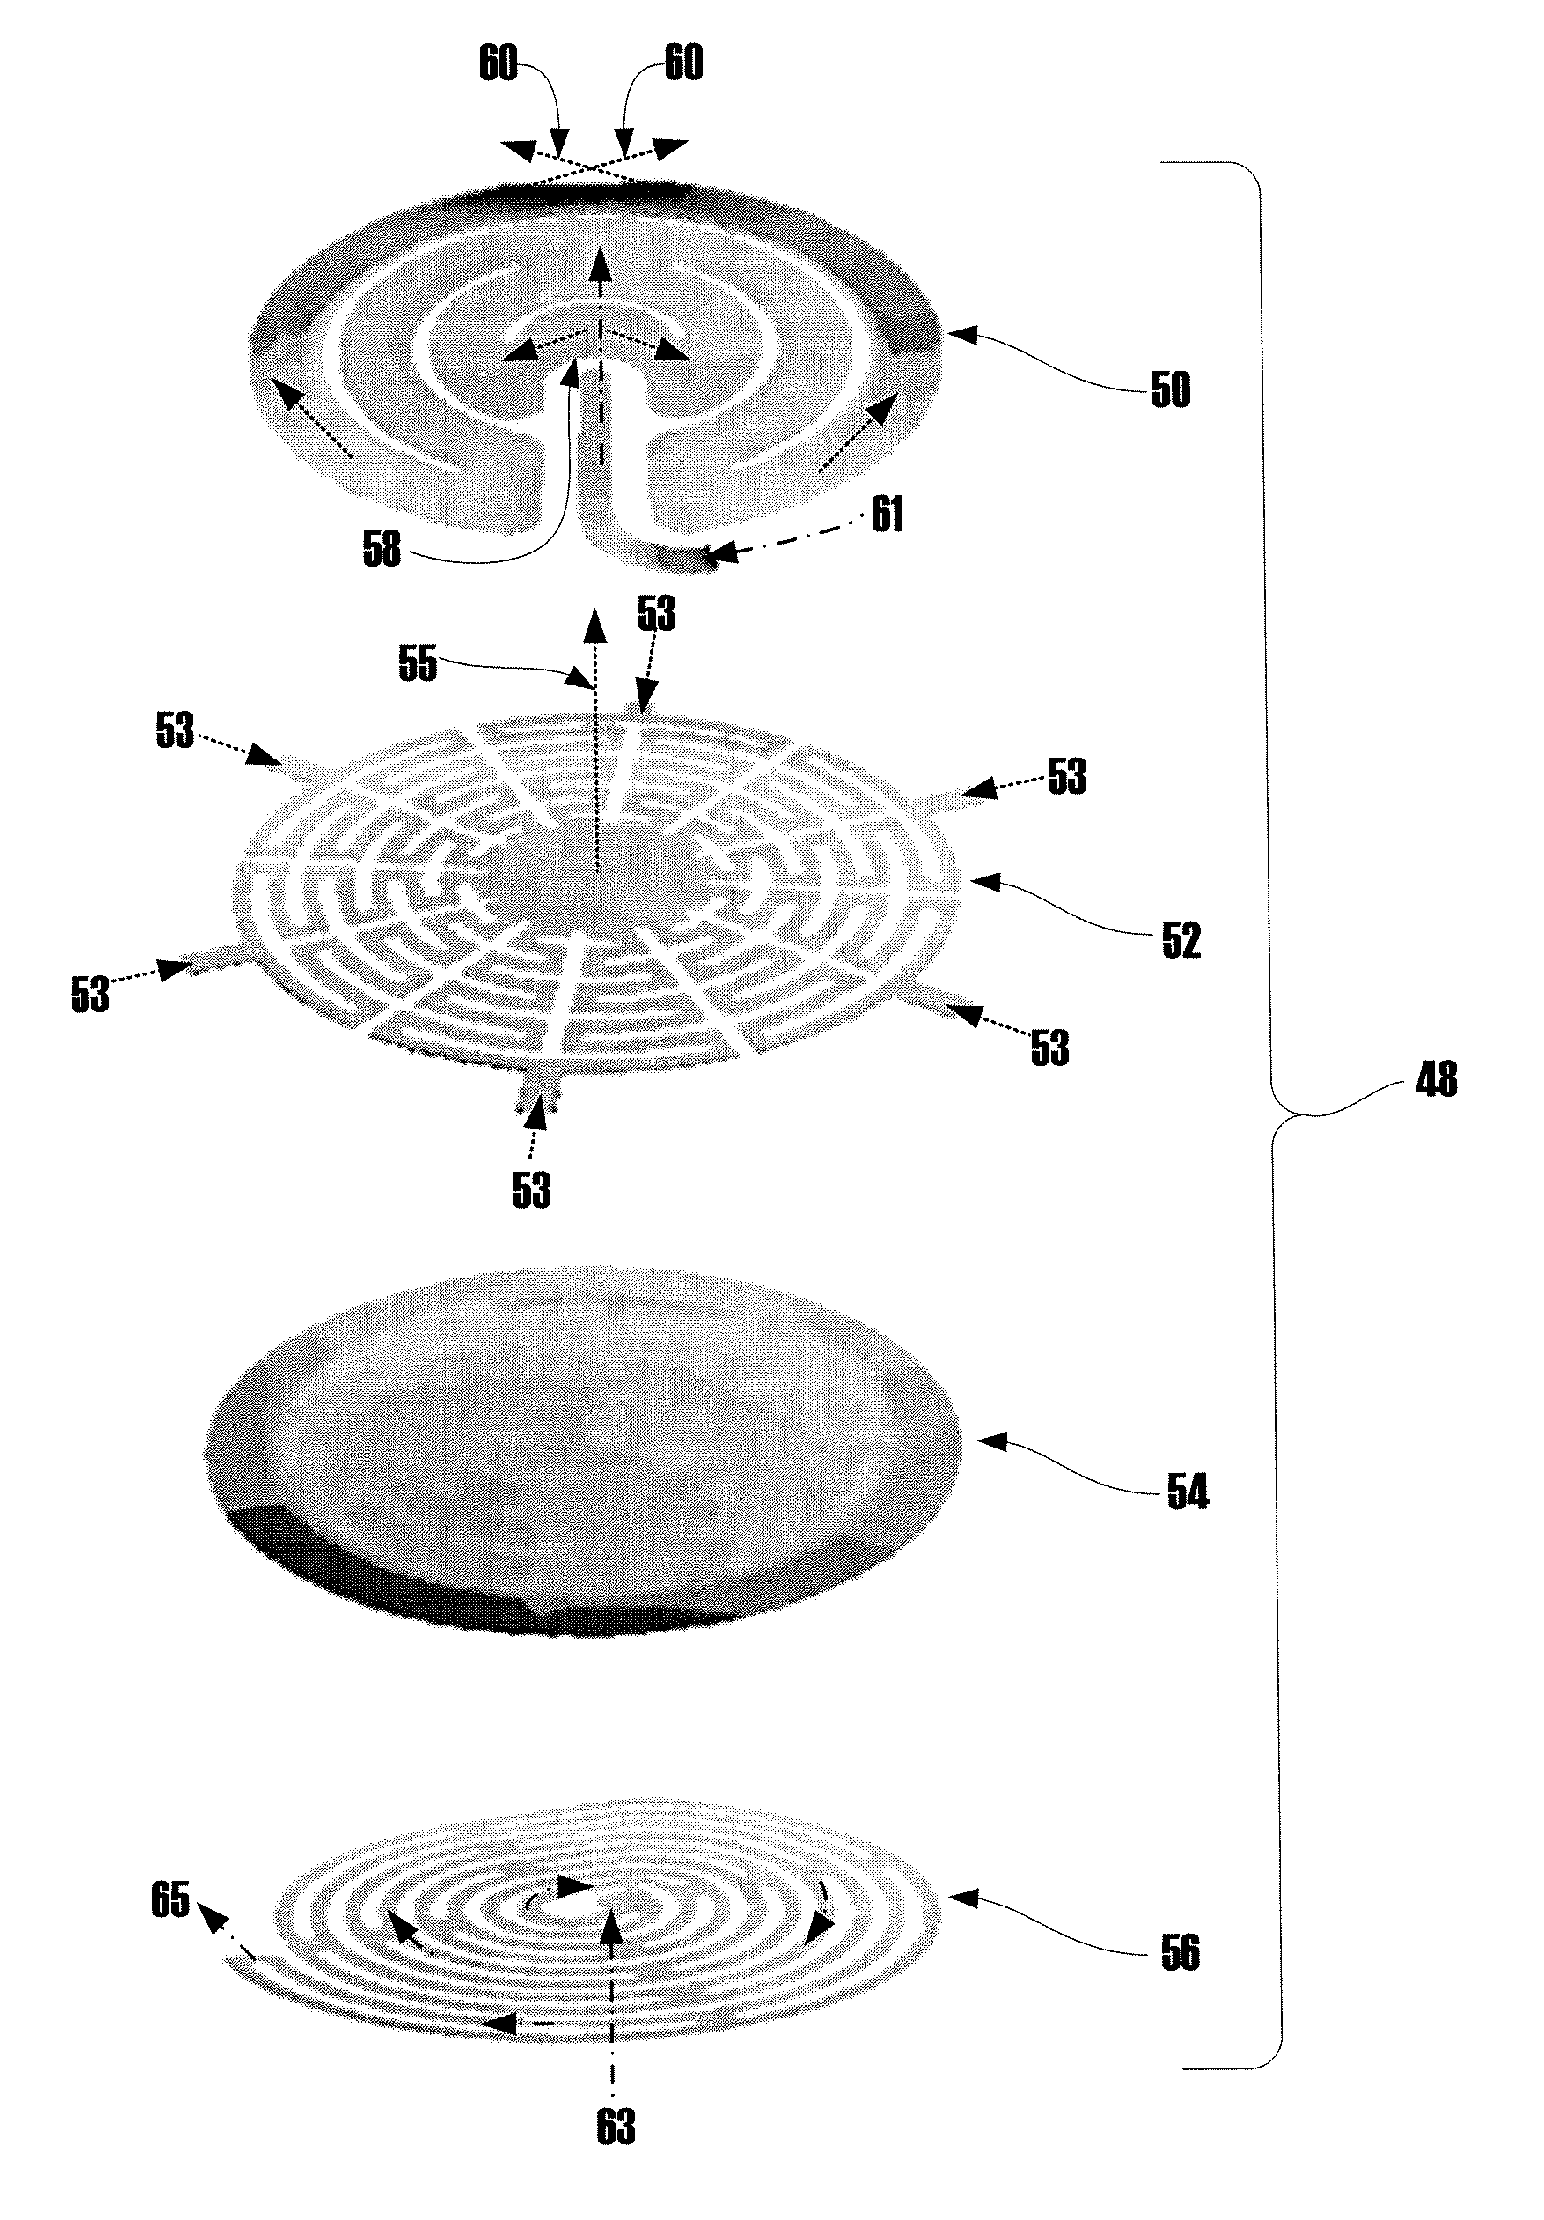 Systems and Methods for Minimizing Temperature Differences and Gradients in Solid Oxide Fuel Cells